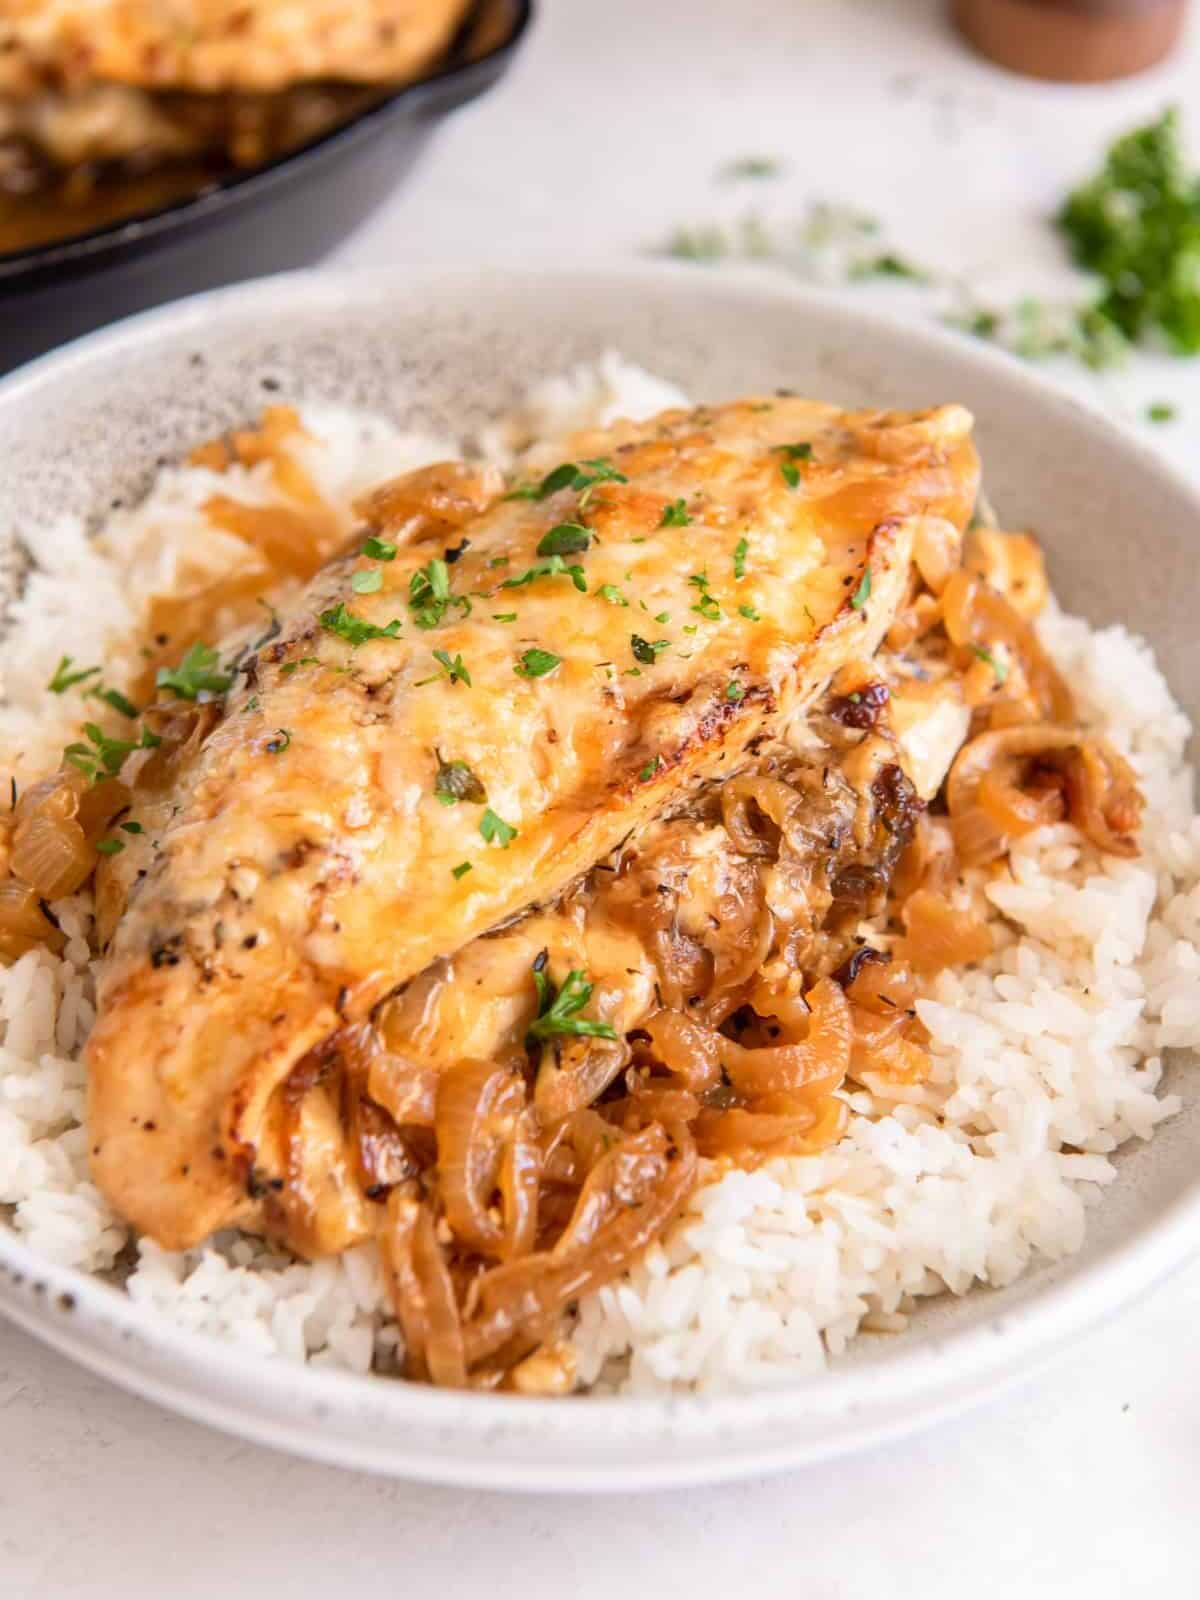 french onion stuffed chicken breast on a bed of white rice in a white bowl.